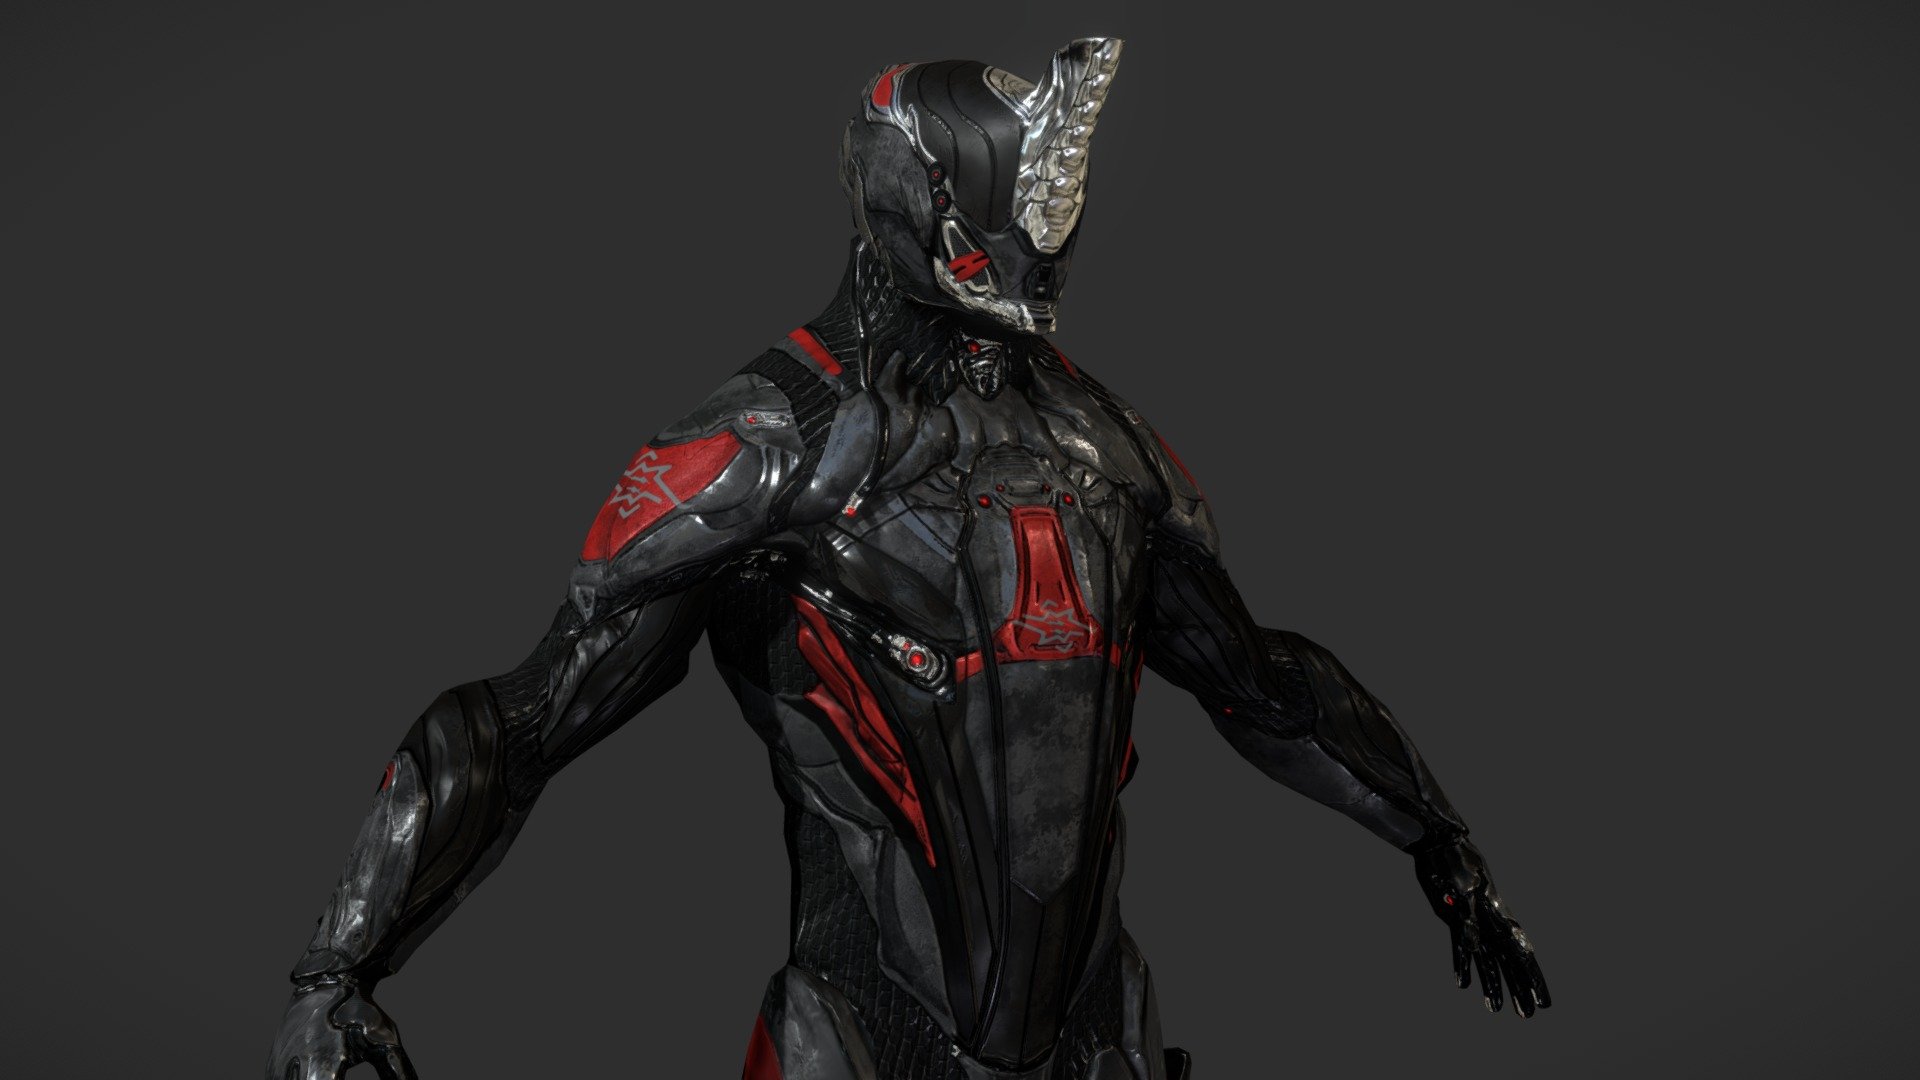 A quality of life update to the Excalibur Apex skin for Warframe Tennogen, originally released in 2016. I'm hoping I can get this through so that it'll be in the game by the time Tennogen Round 13 is added to the game 3d model